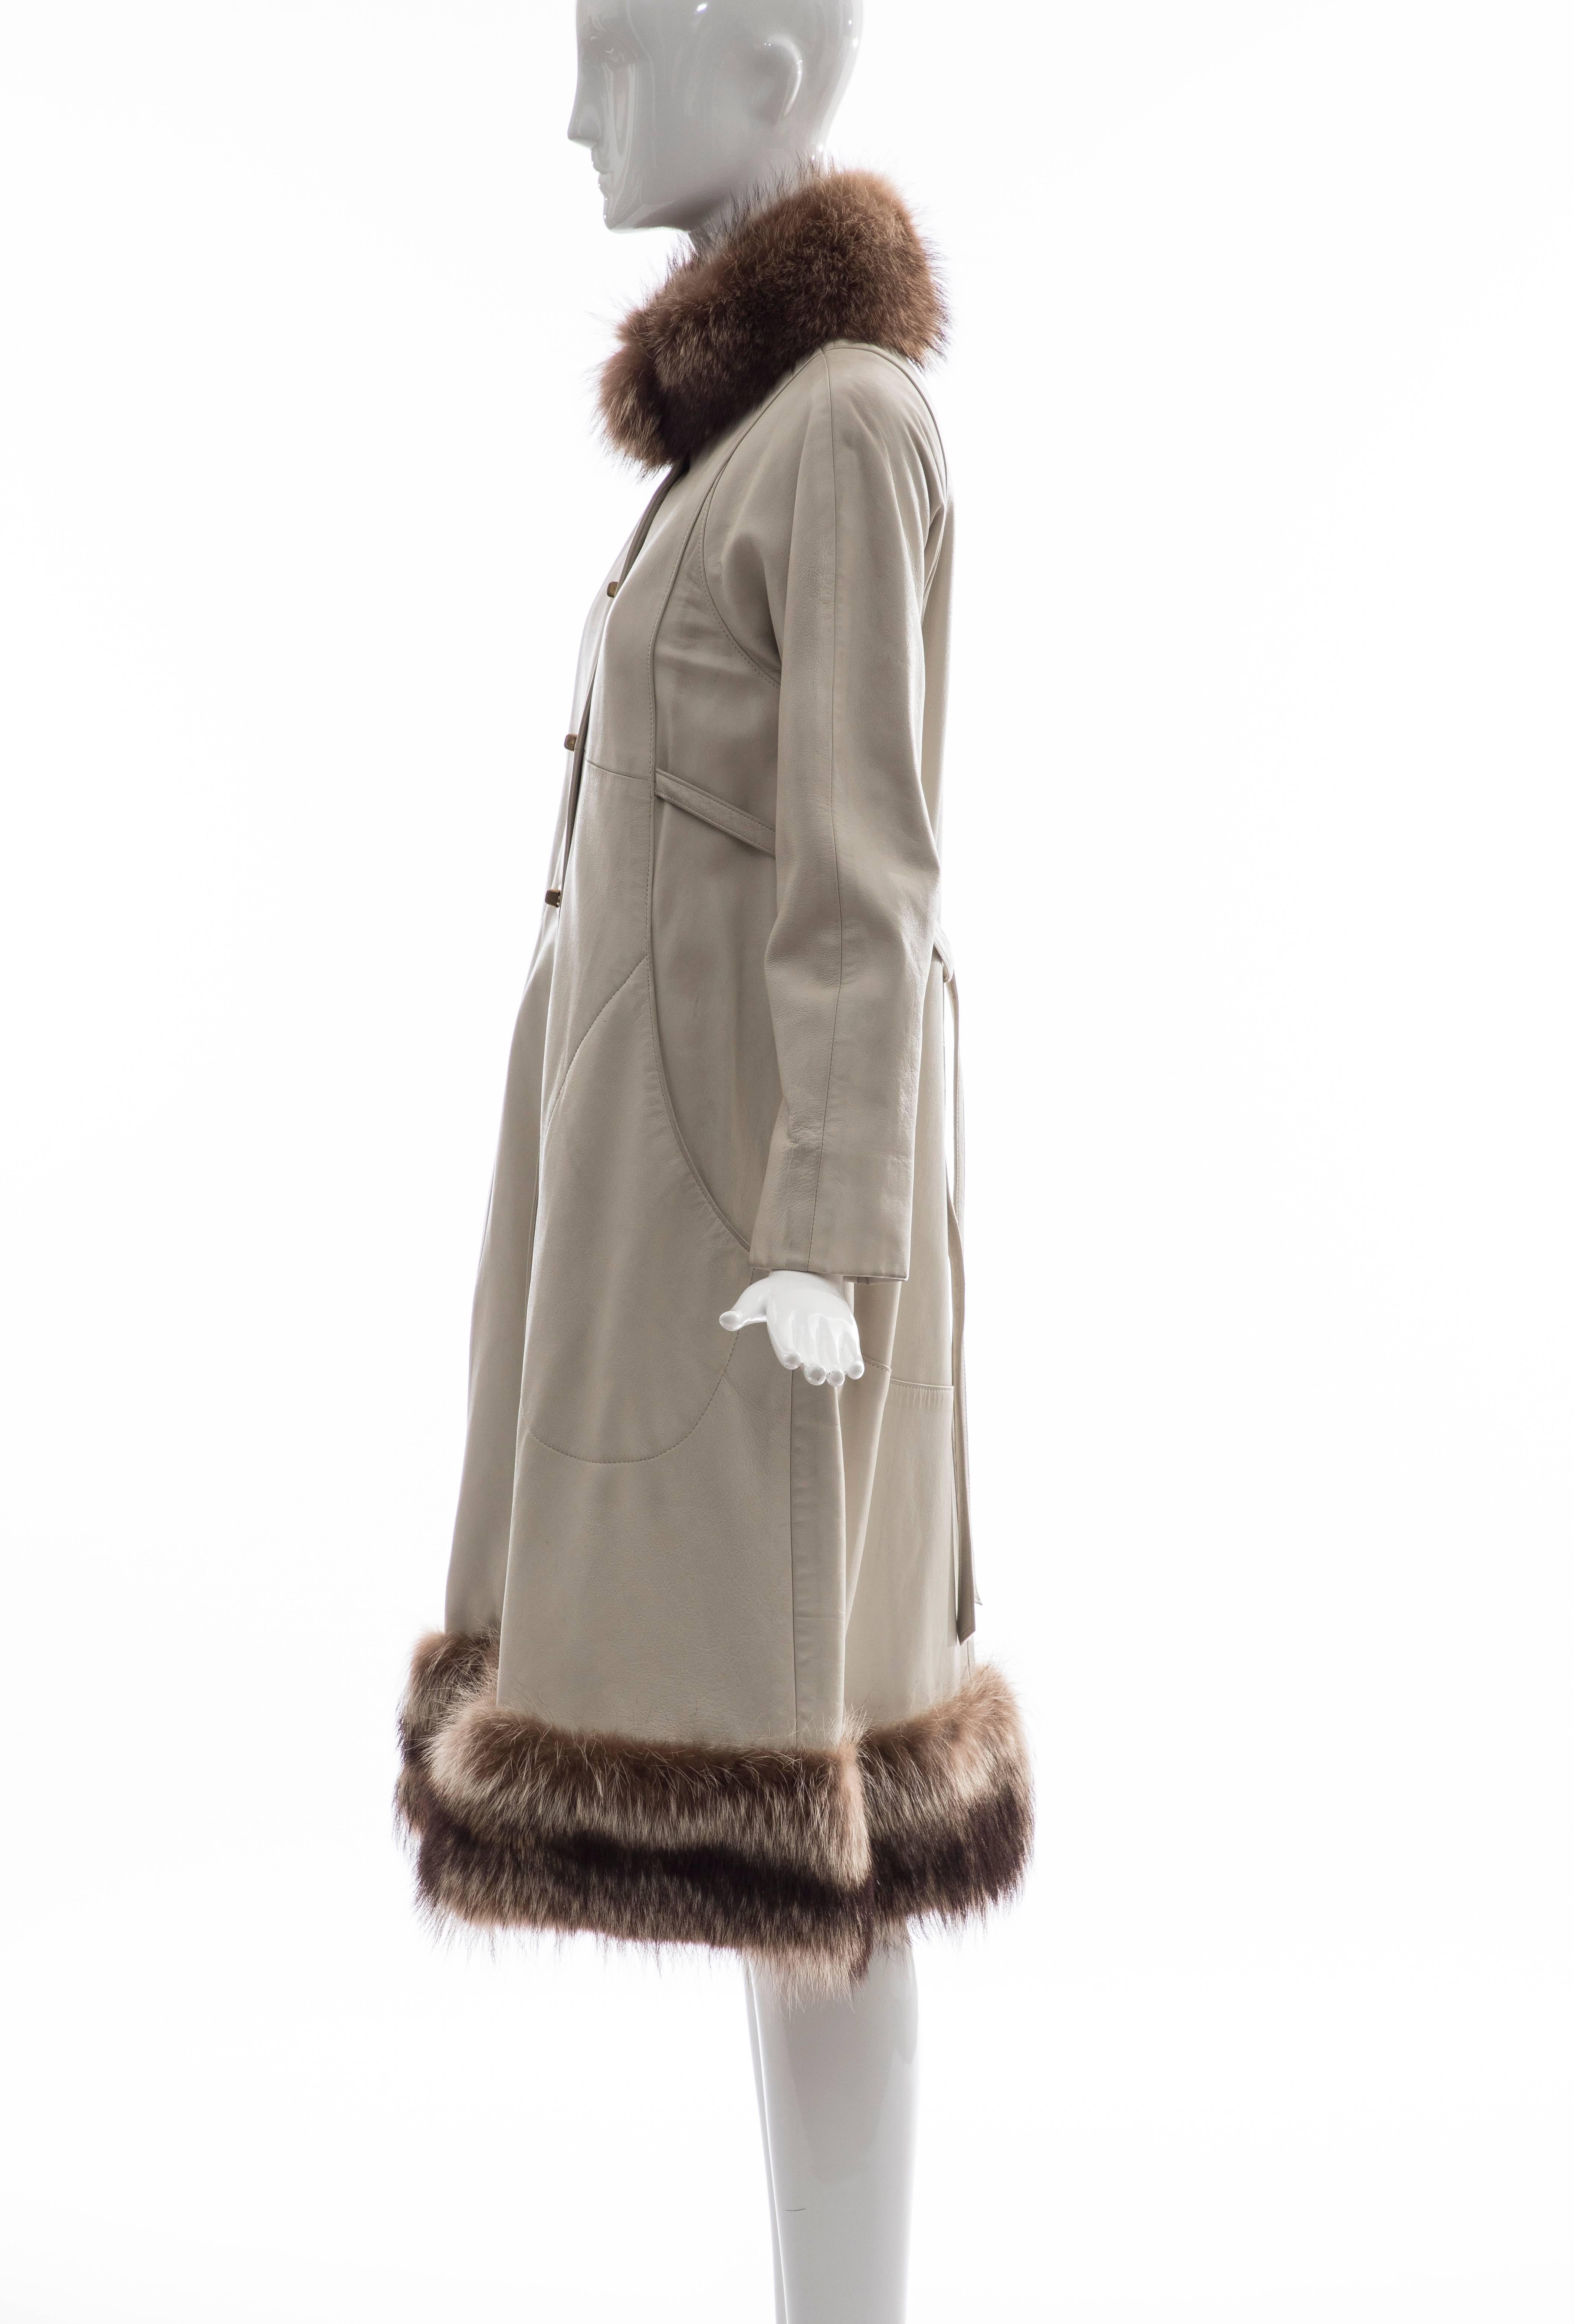 Bonnie Cashin For Sills Leather Coat With Fur Trim, Circa 1960s For Sale 4